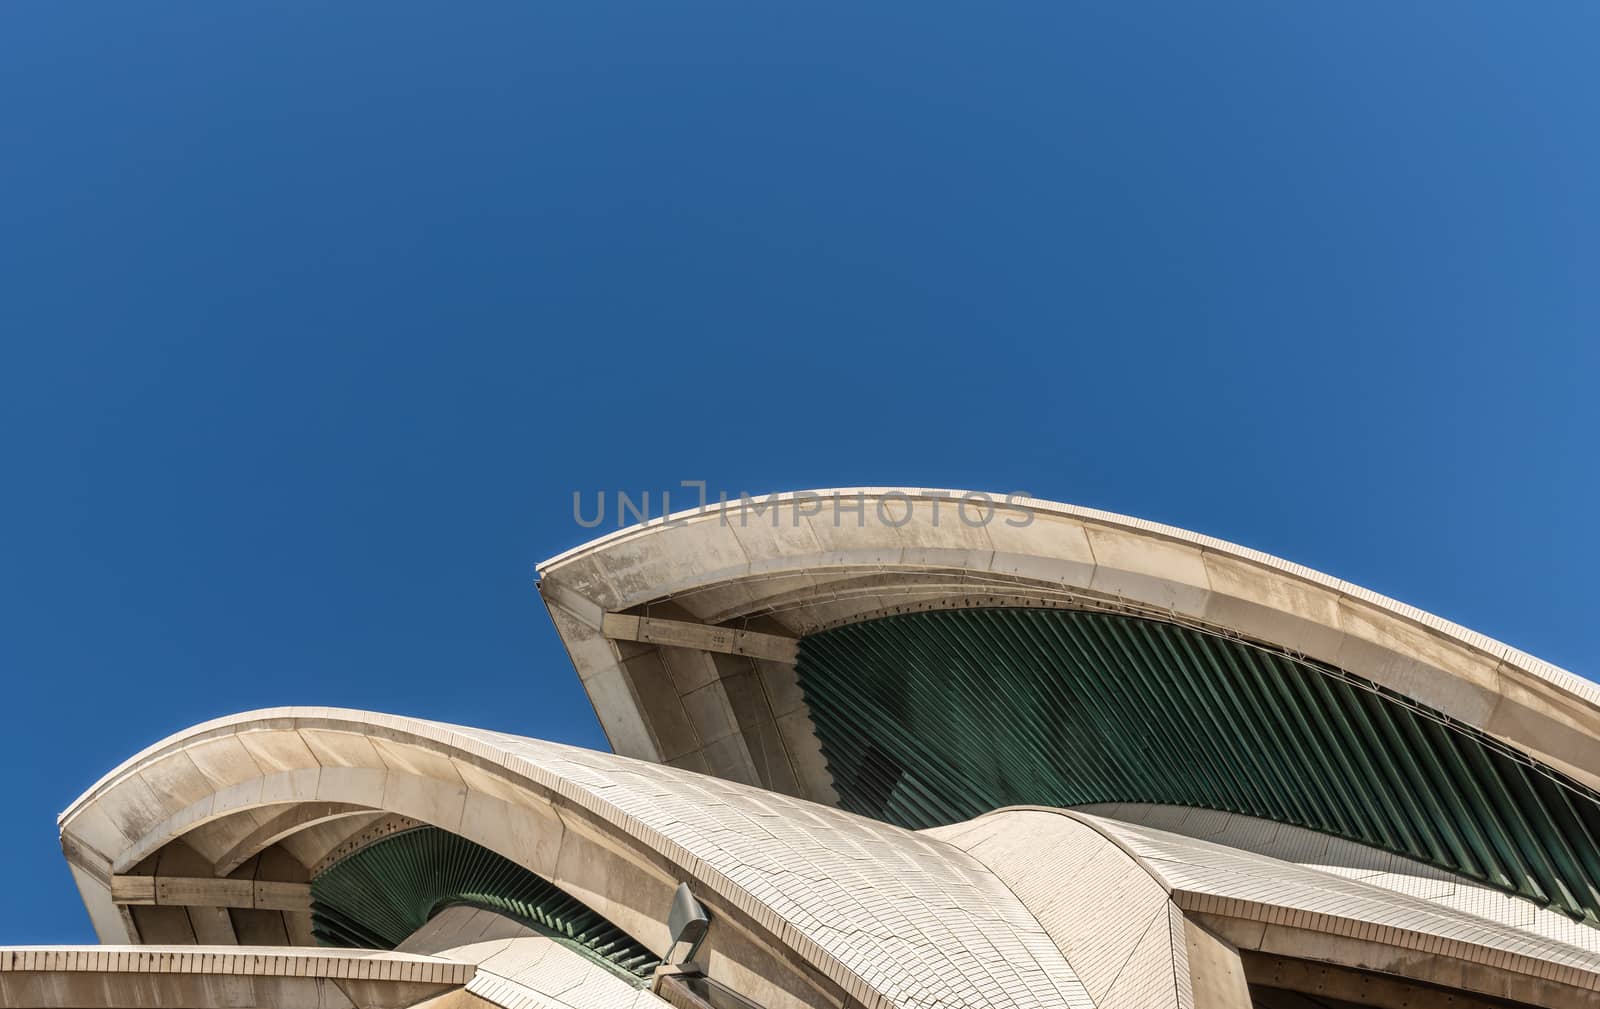 Sydney, Australia - February 11, 2019: Detail of white roof structure of Sydney Opera House against deep blue sky. 2 of 12.